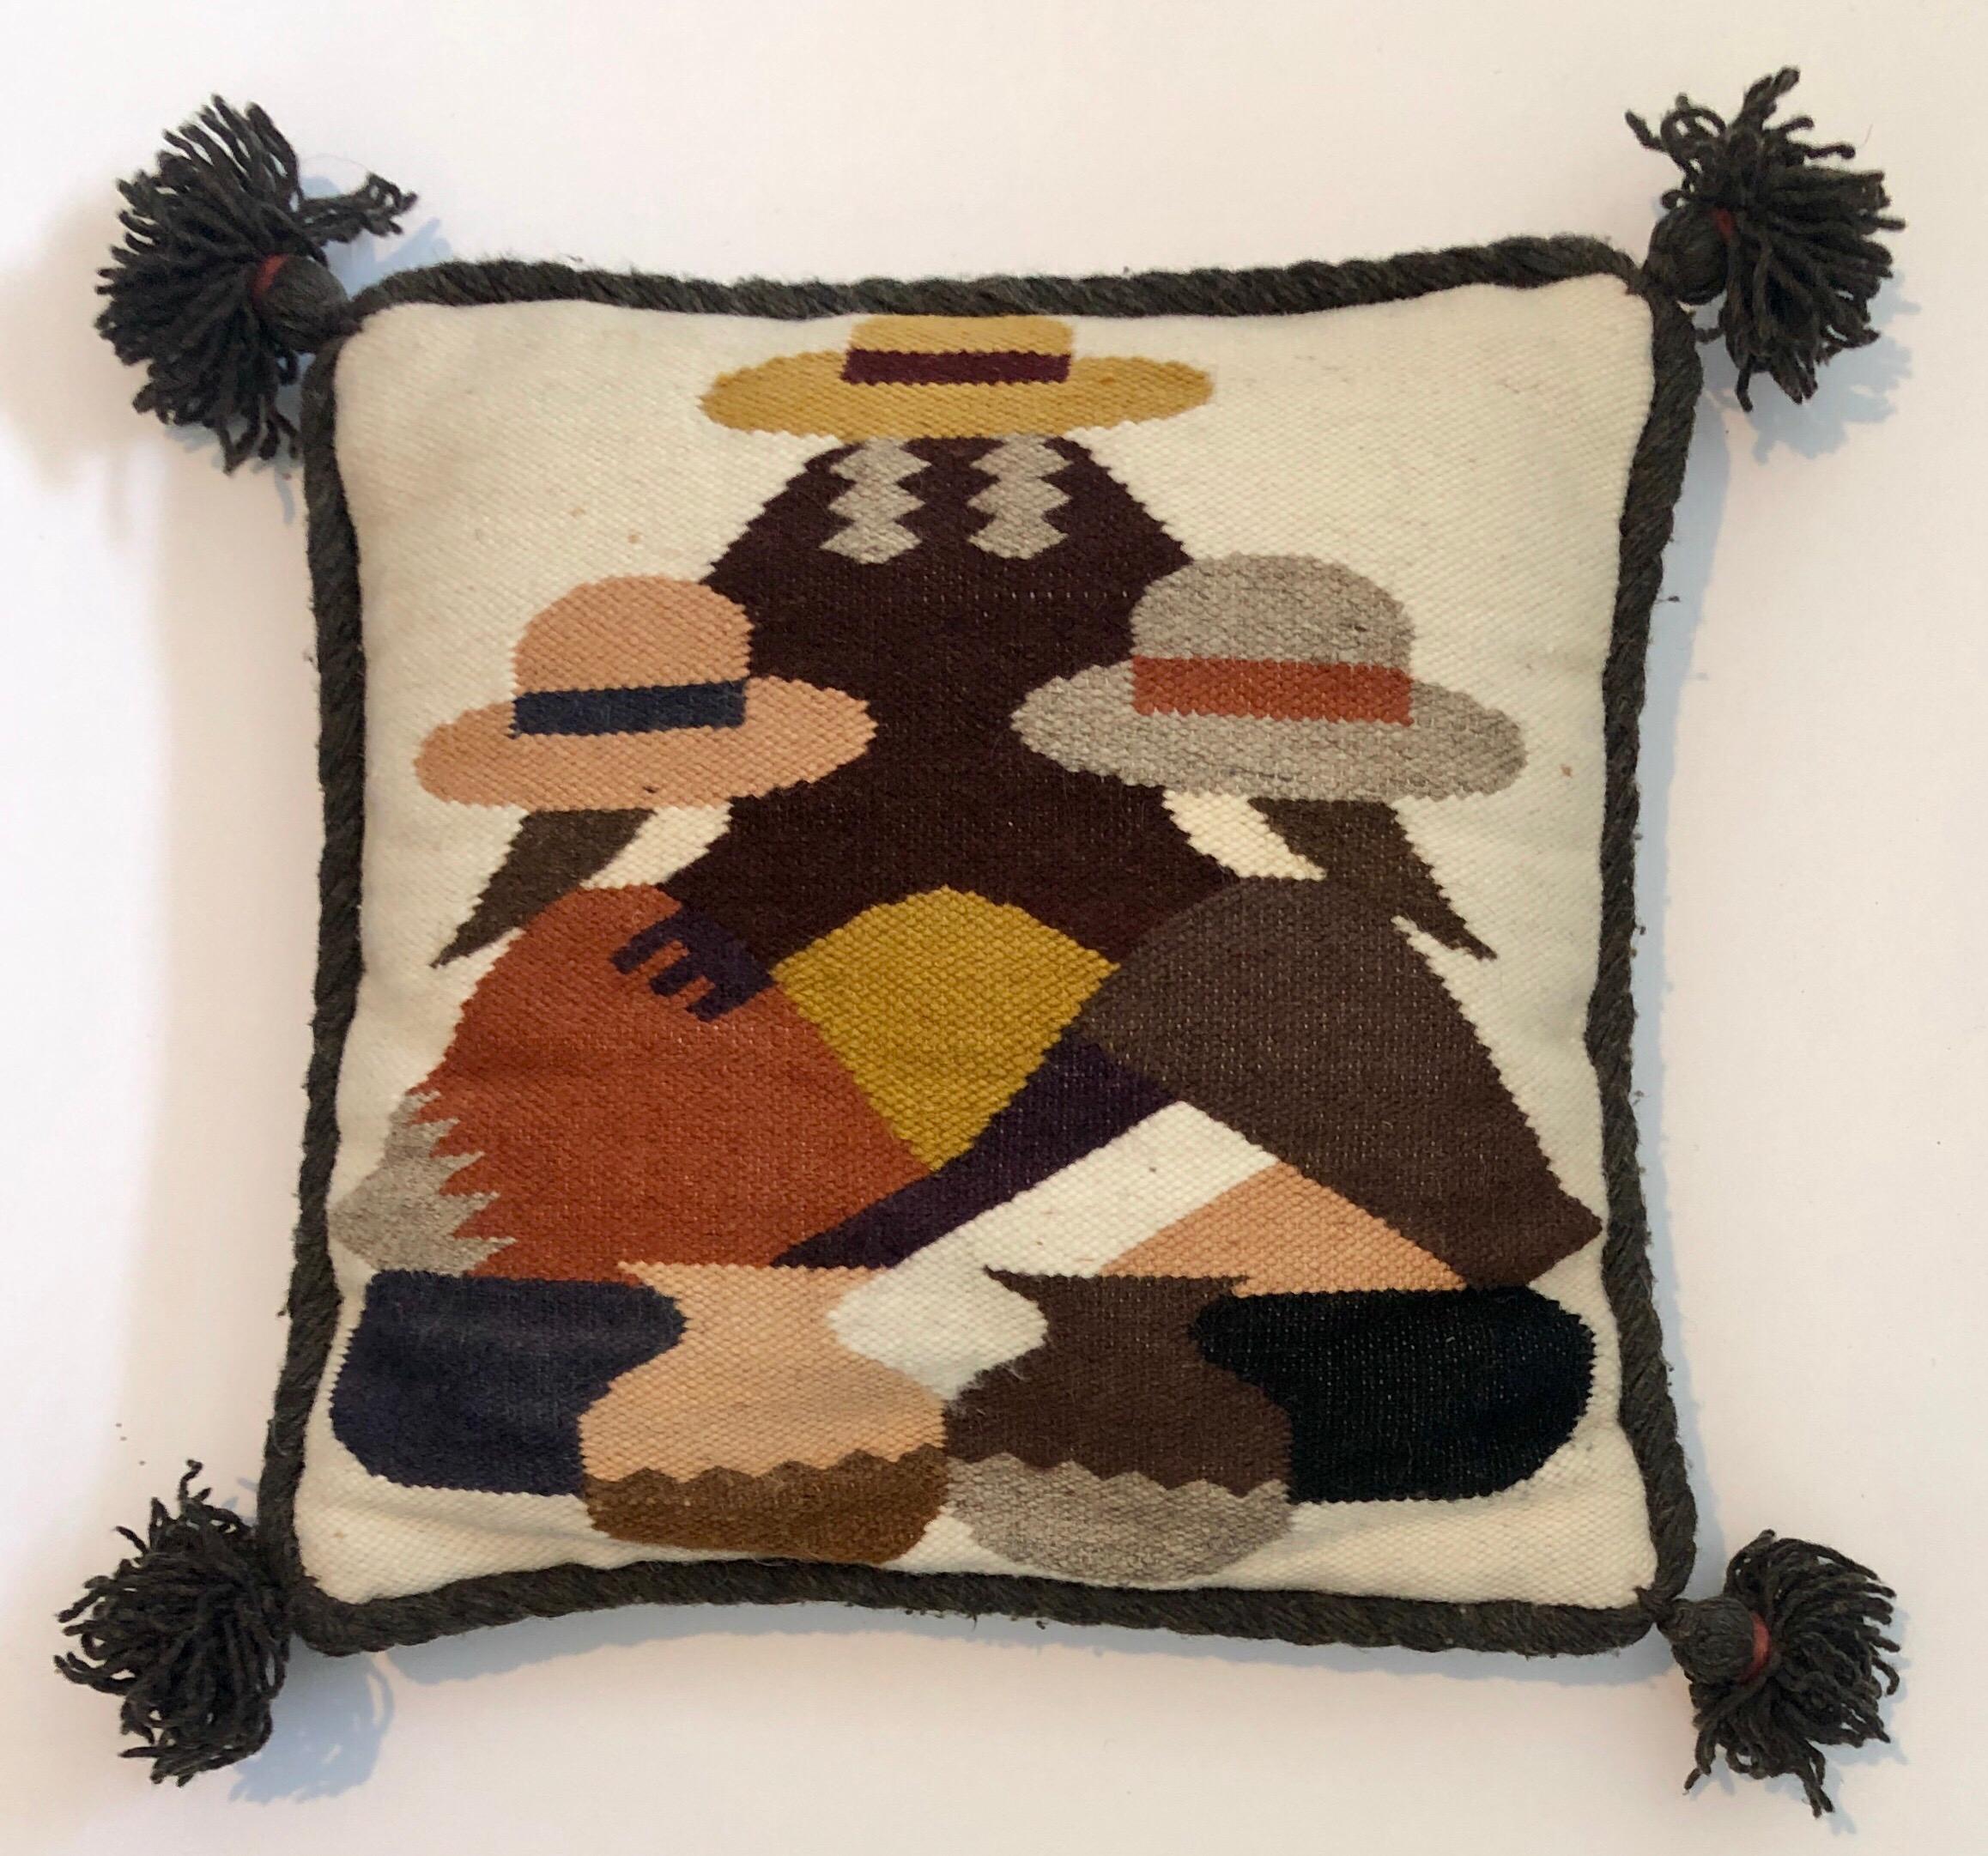 Olga Fisch was born in Hungary, studied in Germany and lived in Morocco and Ethiopia before receiving asylum as a Jewish refugee in Ecuador in 1939. For her Indian-inspired designs, Mrs. Fisch uses natural black and white sheep's wool colored with